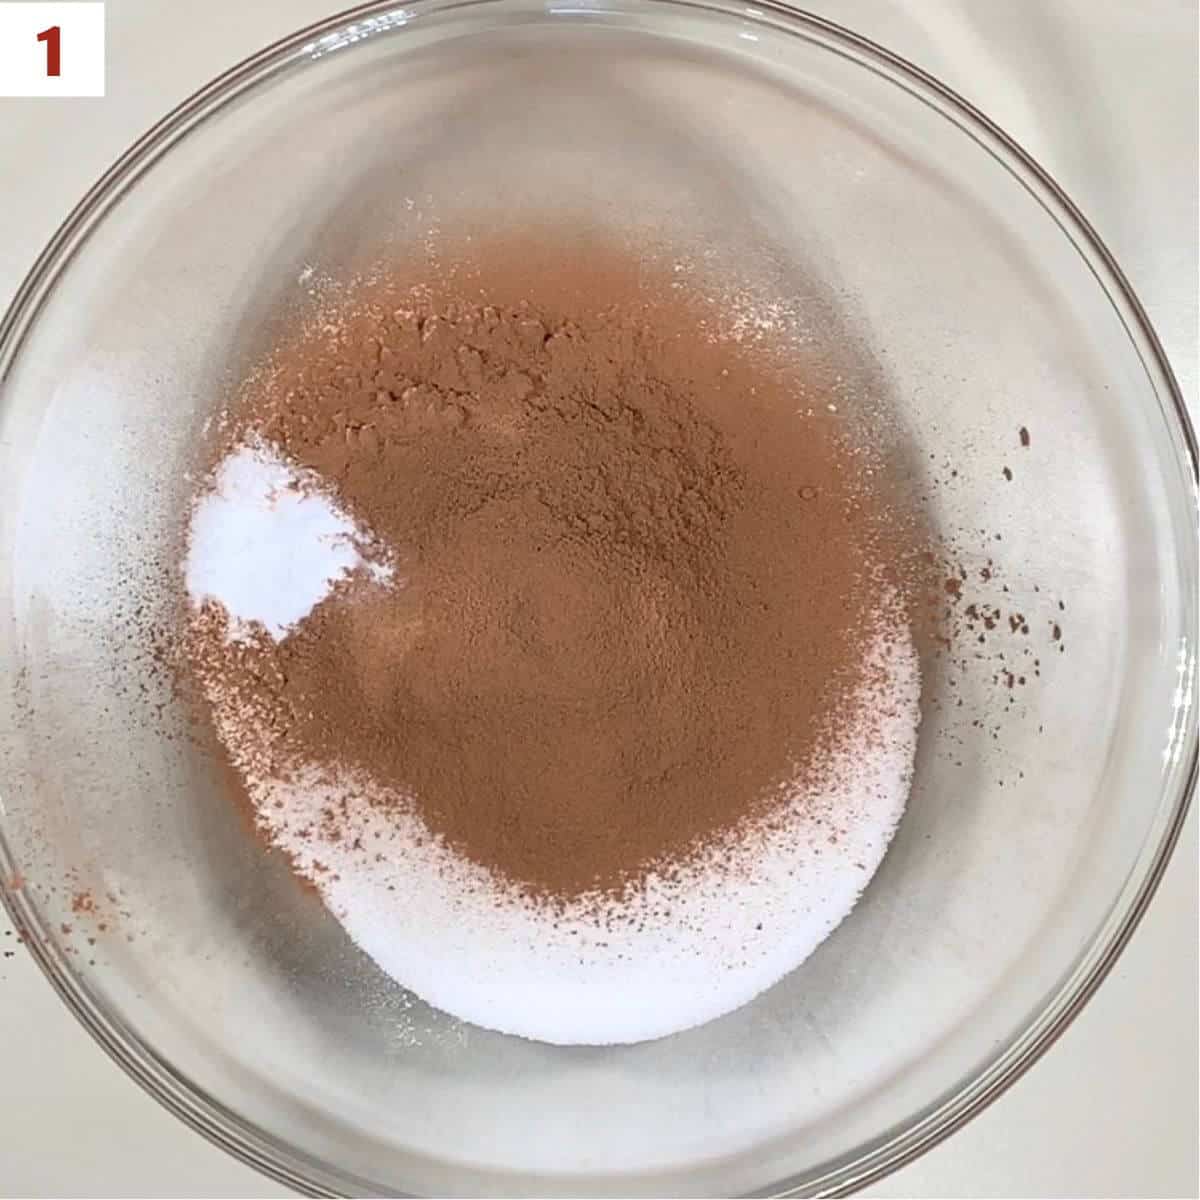 Flour, sugar, cocoa powder, baking soda, and salt in a glass bowl from overhead.